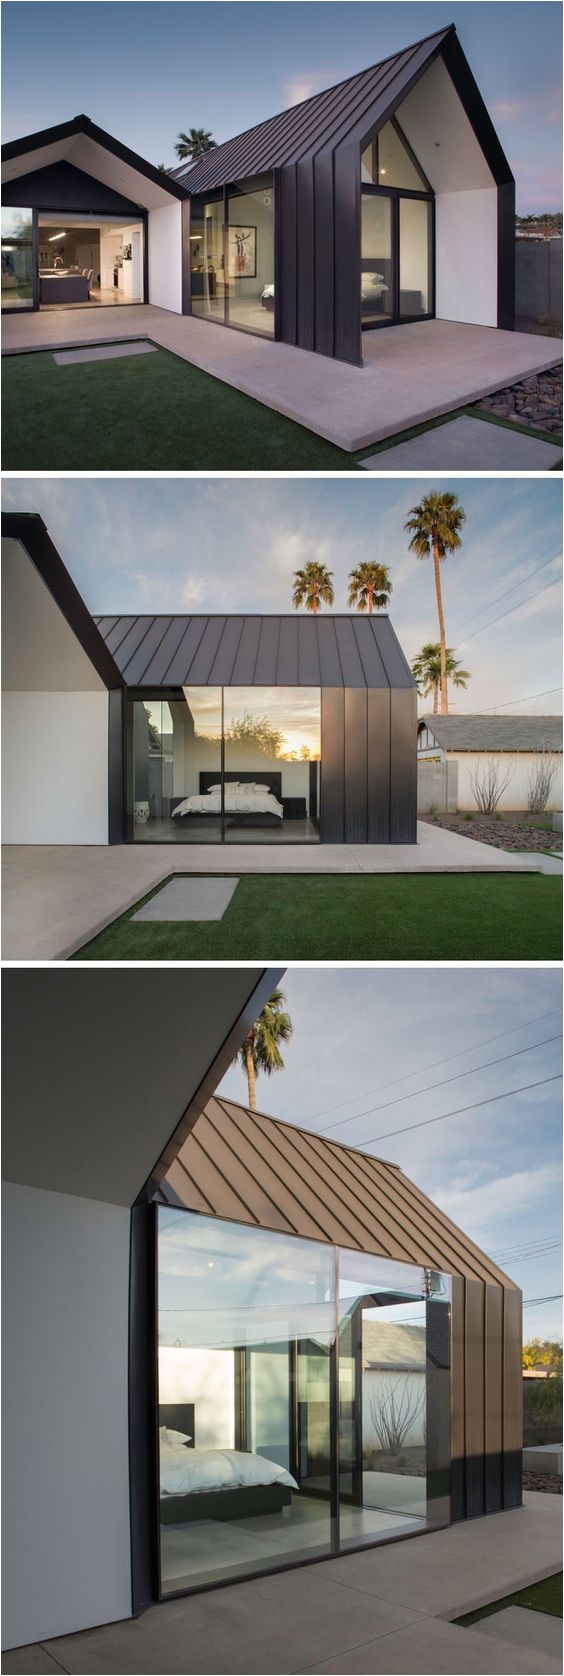 a contemporary update and extension for a 1930s home in phoenix arizona